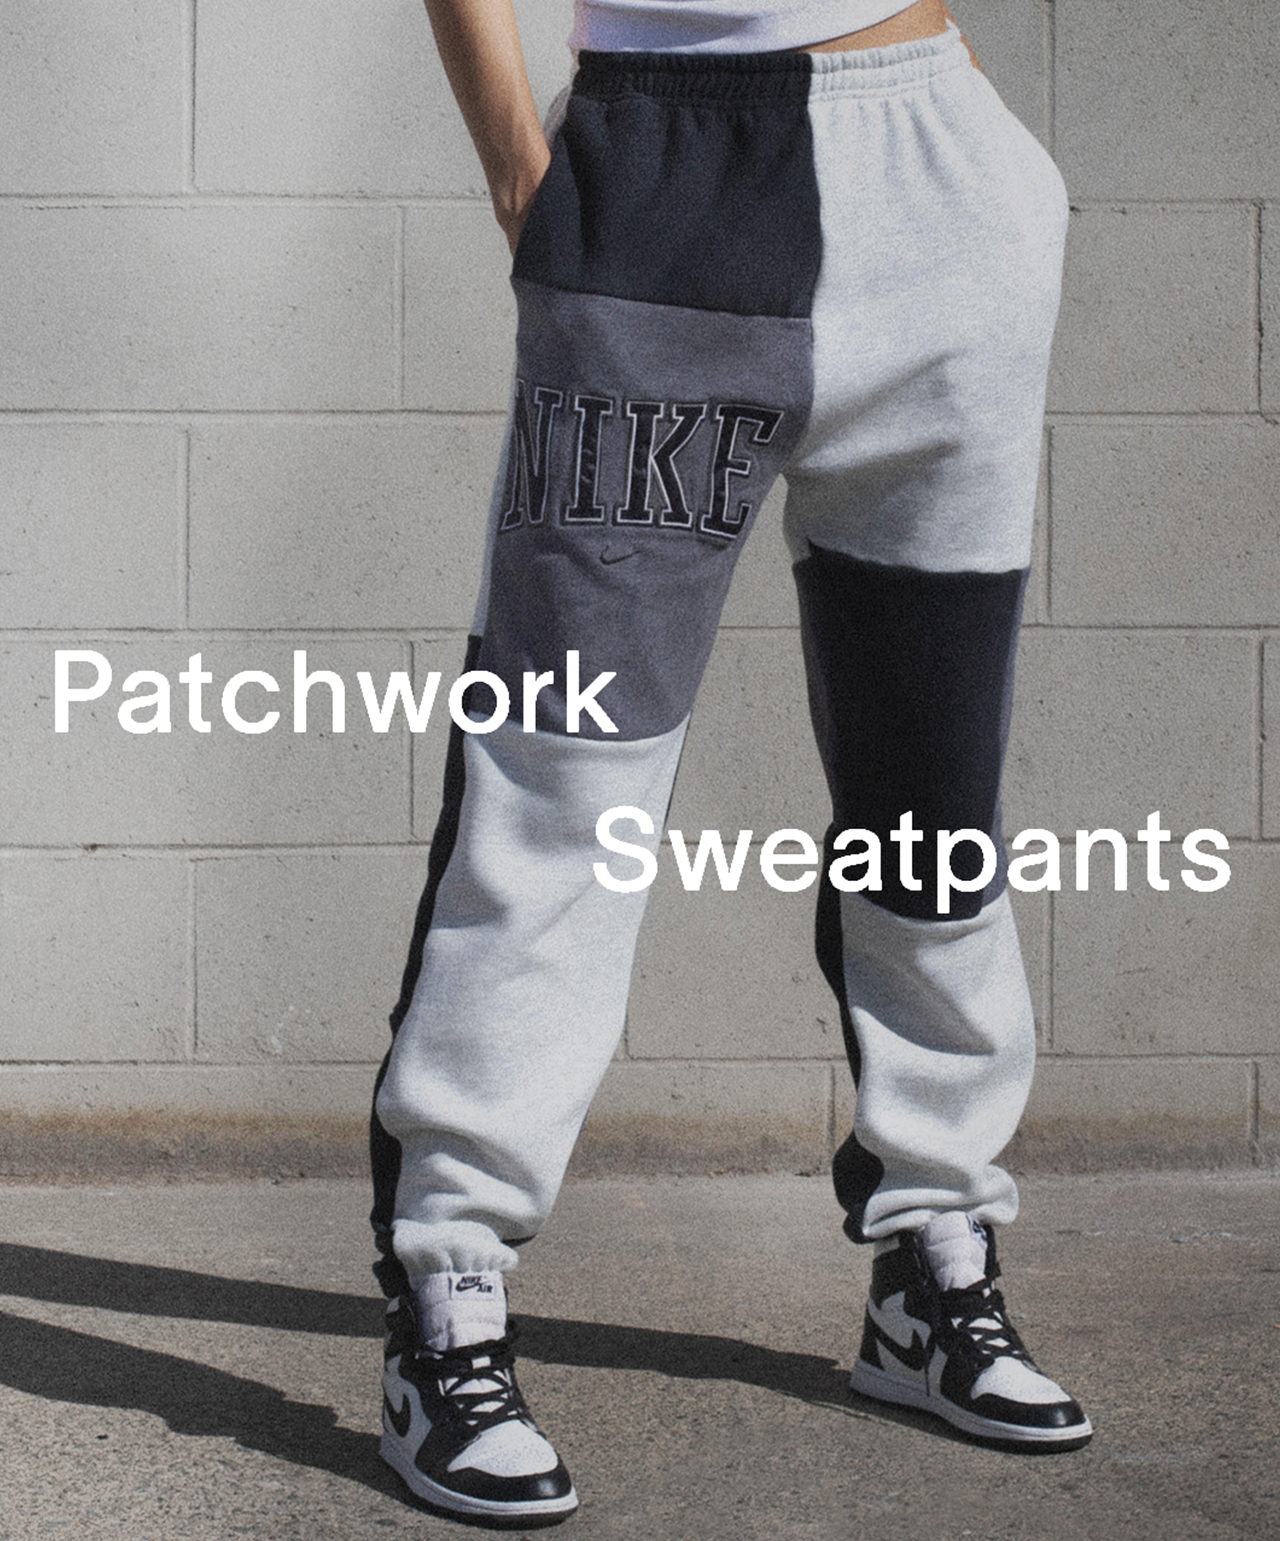 Frankie Collective Drops New Nike Rework Pants